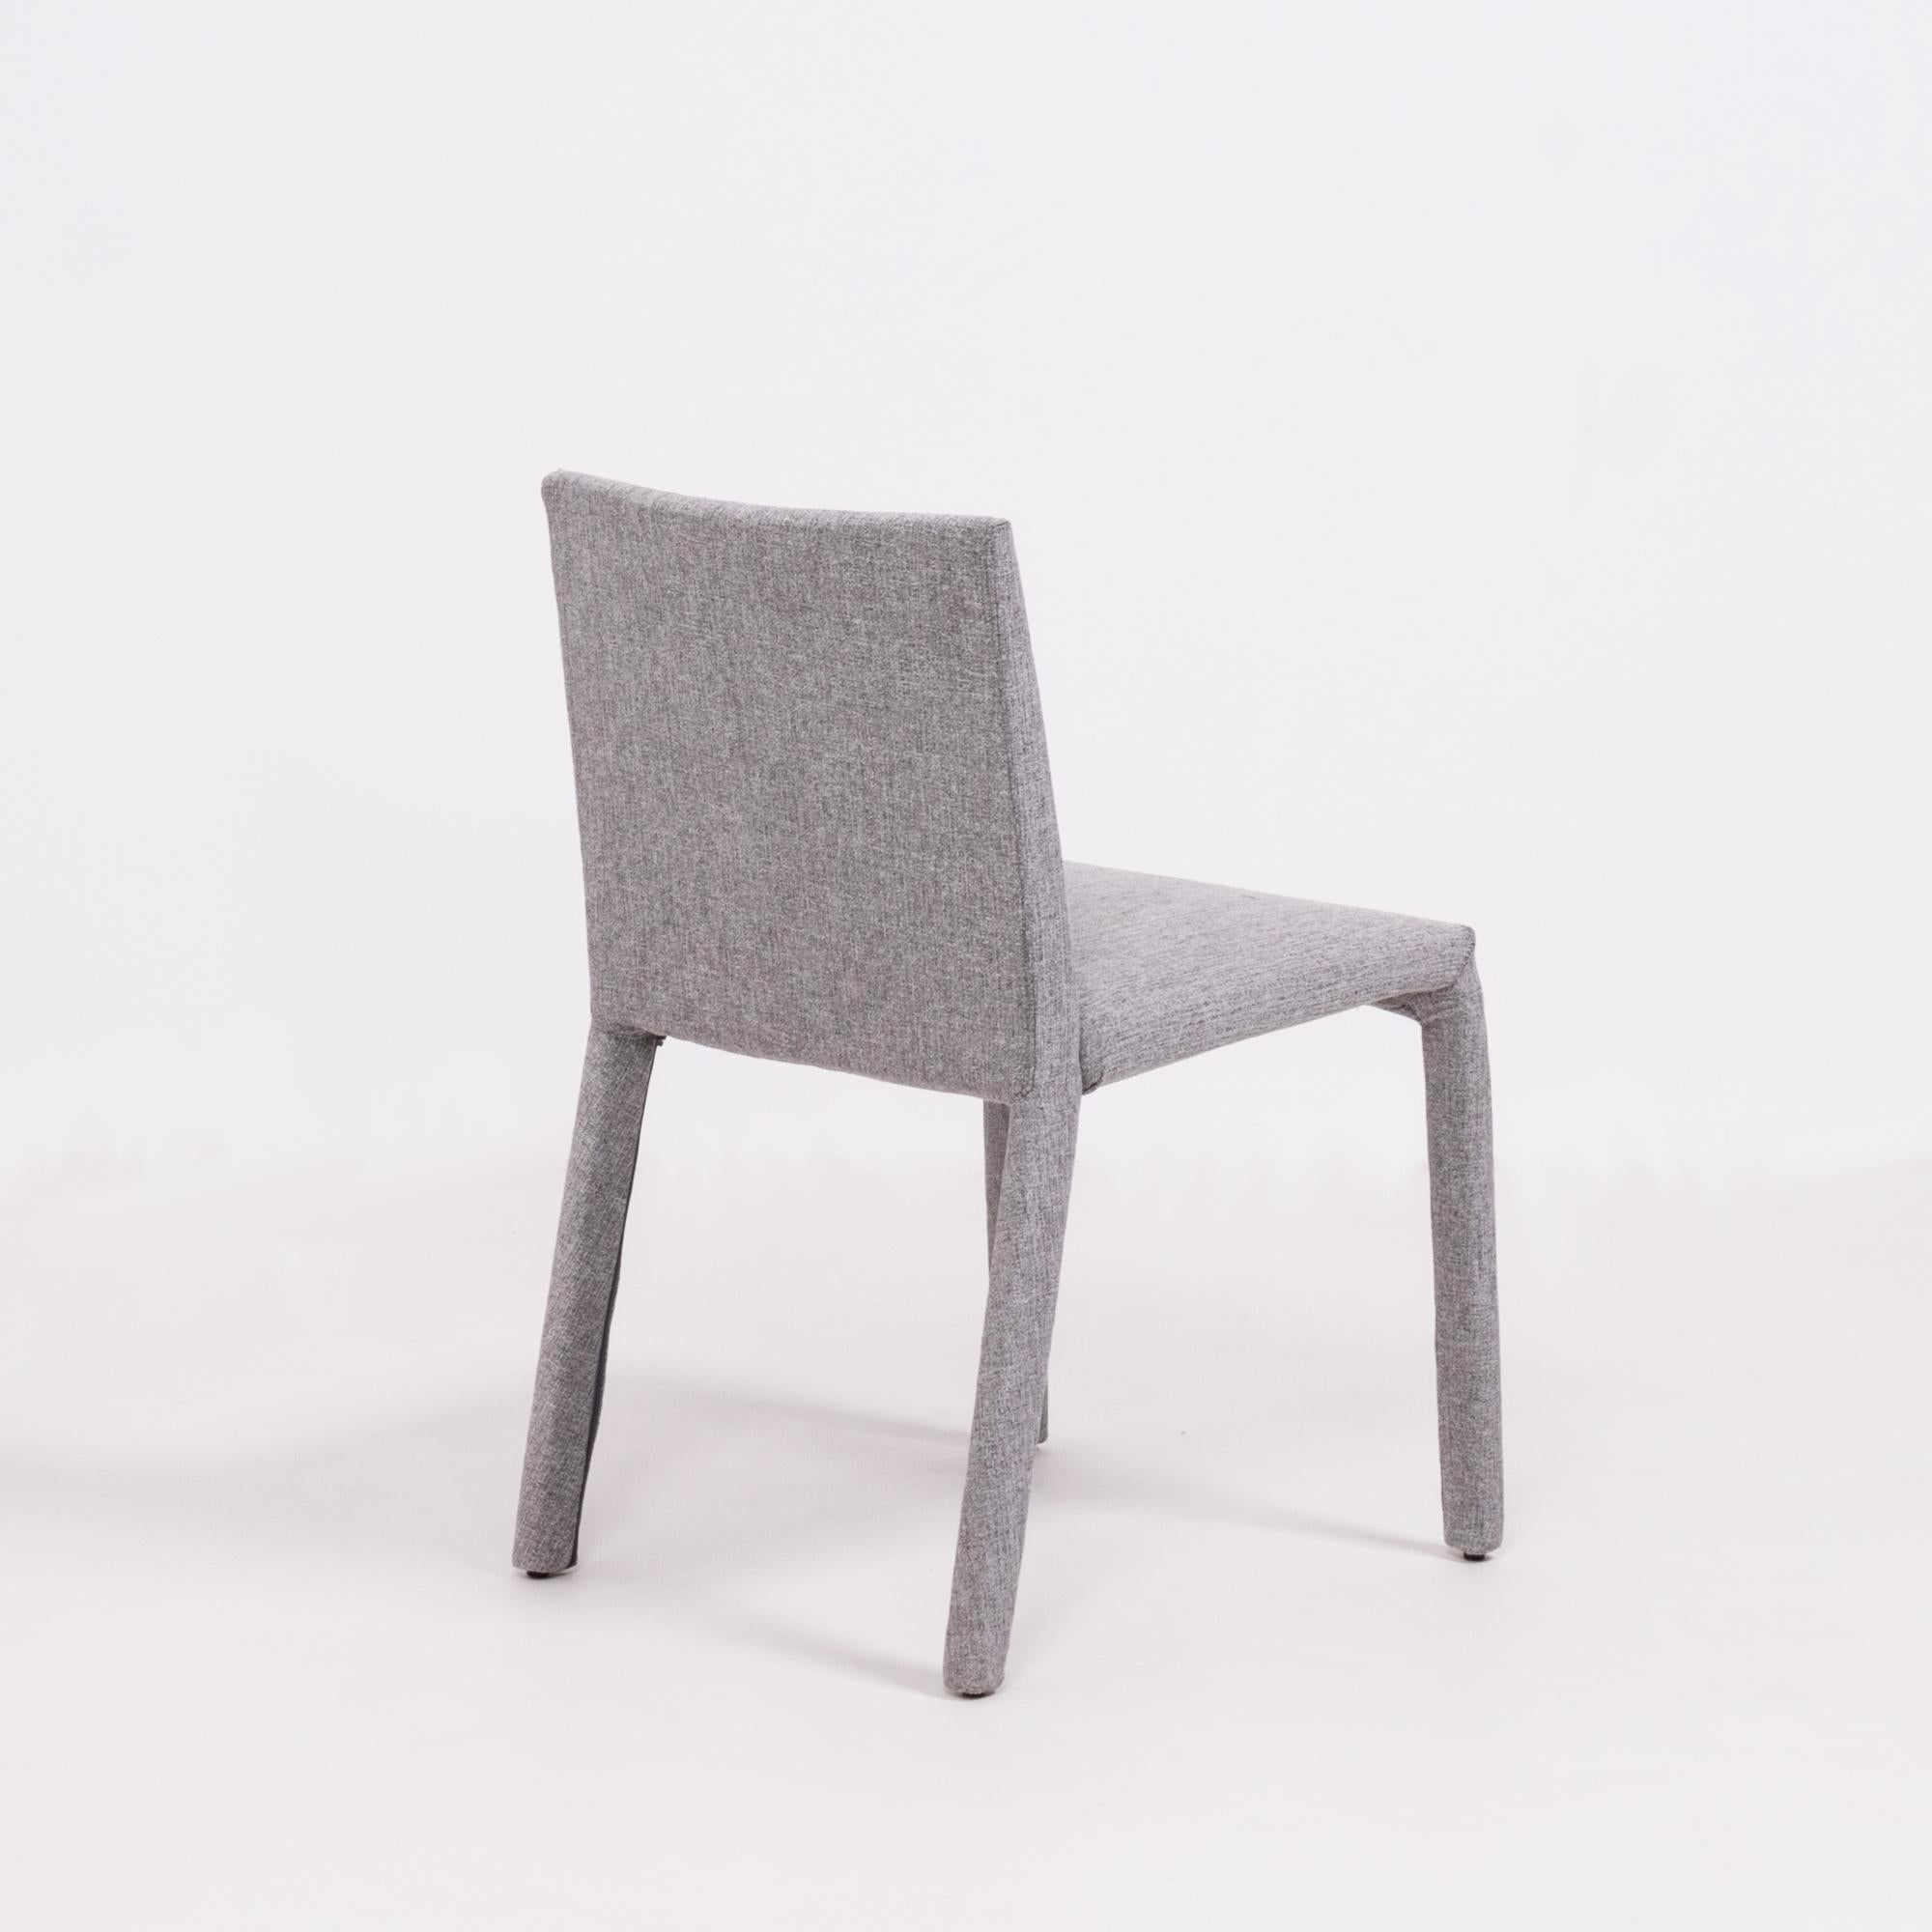 Poliform 'Fly Tre' Grey Dining Chairs by Carlo Colombo, Set of 8 1